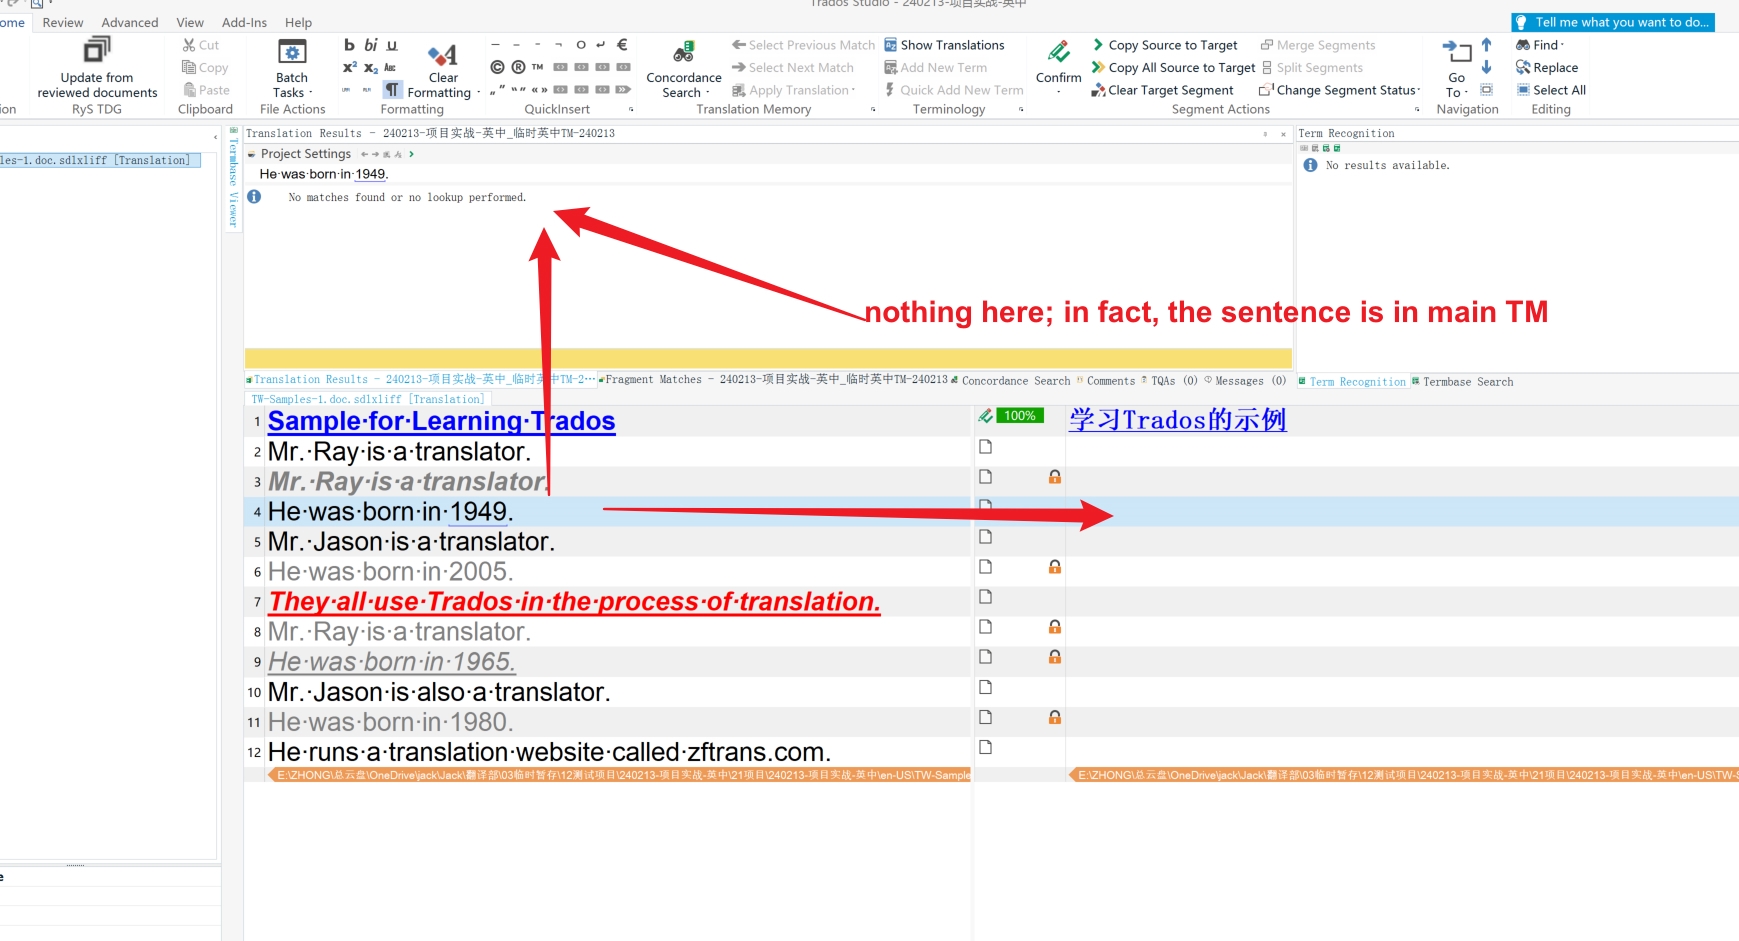 Screenshot of Trados Studio translation interface with no matches found, despite the sentence being in the main translation memory.